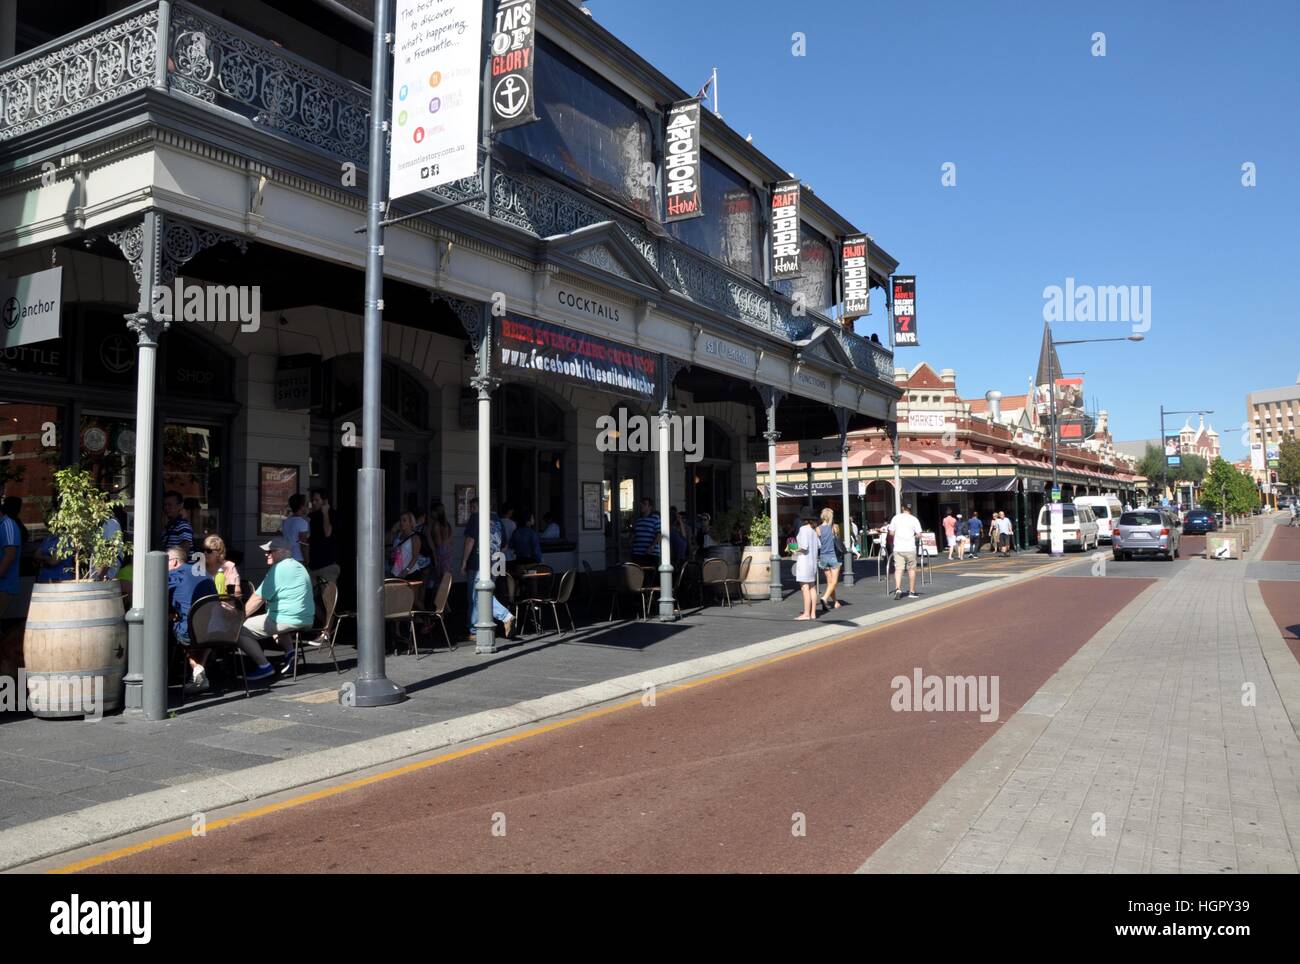 Fremantle,WA,Australia-February 21,2015: Downtown 'cappuccino strip' with tourists and architecture in historic Fremantle, Western Australia. Stock Photo